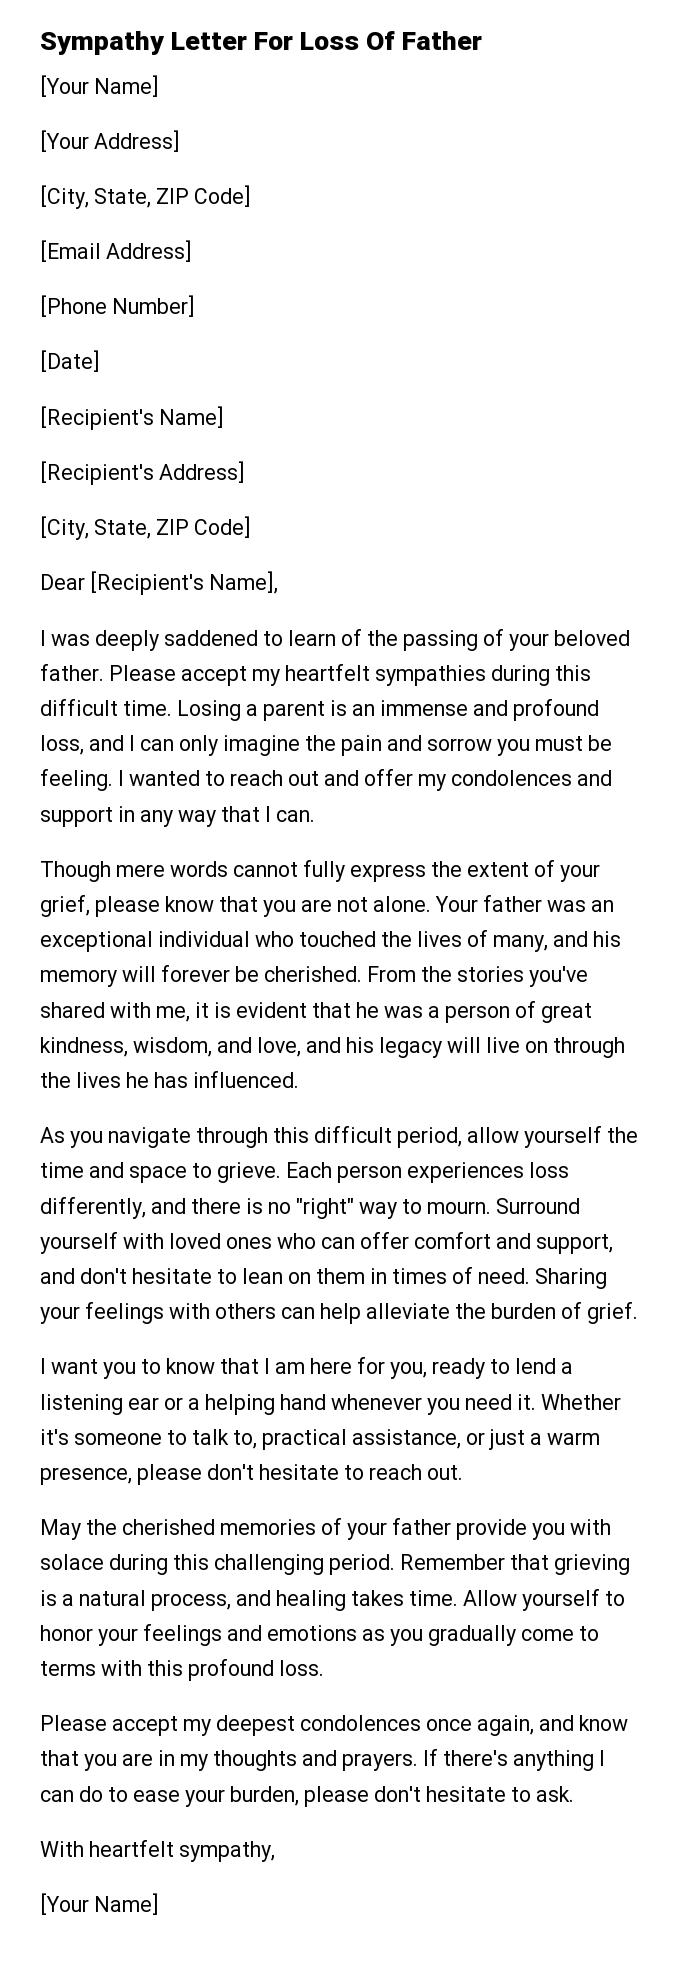 Sympathy Letter For Loss Of Father